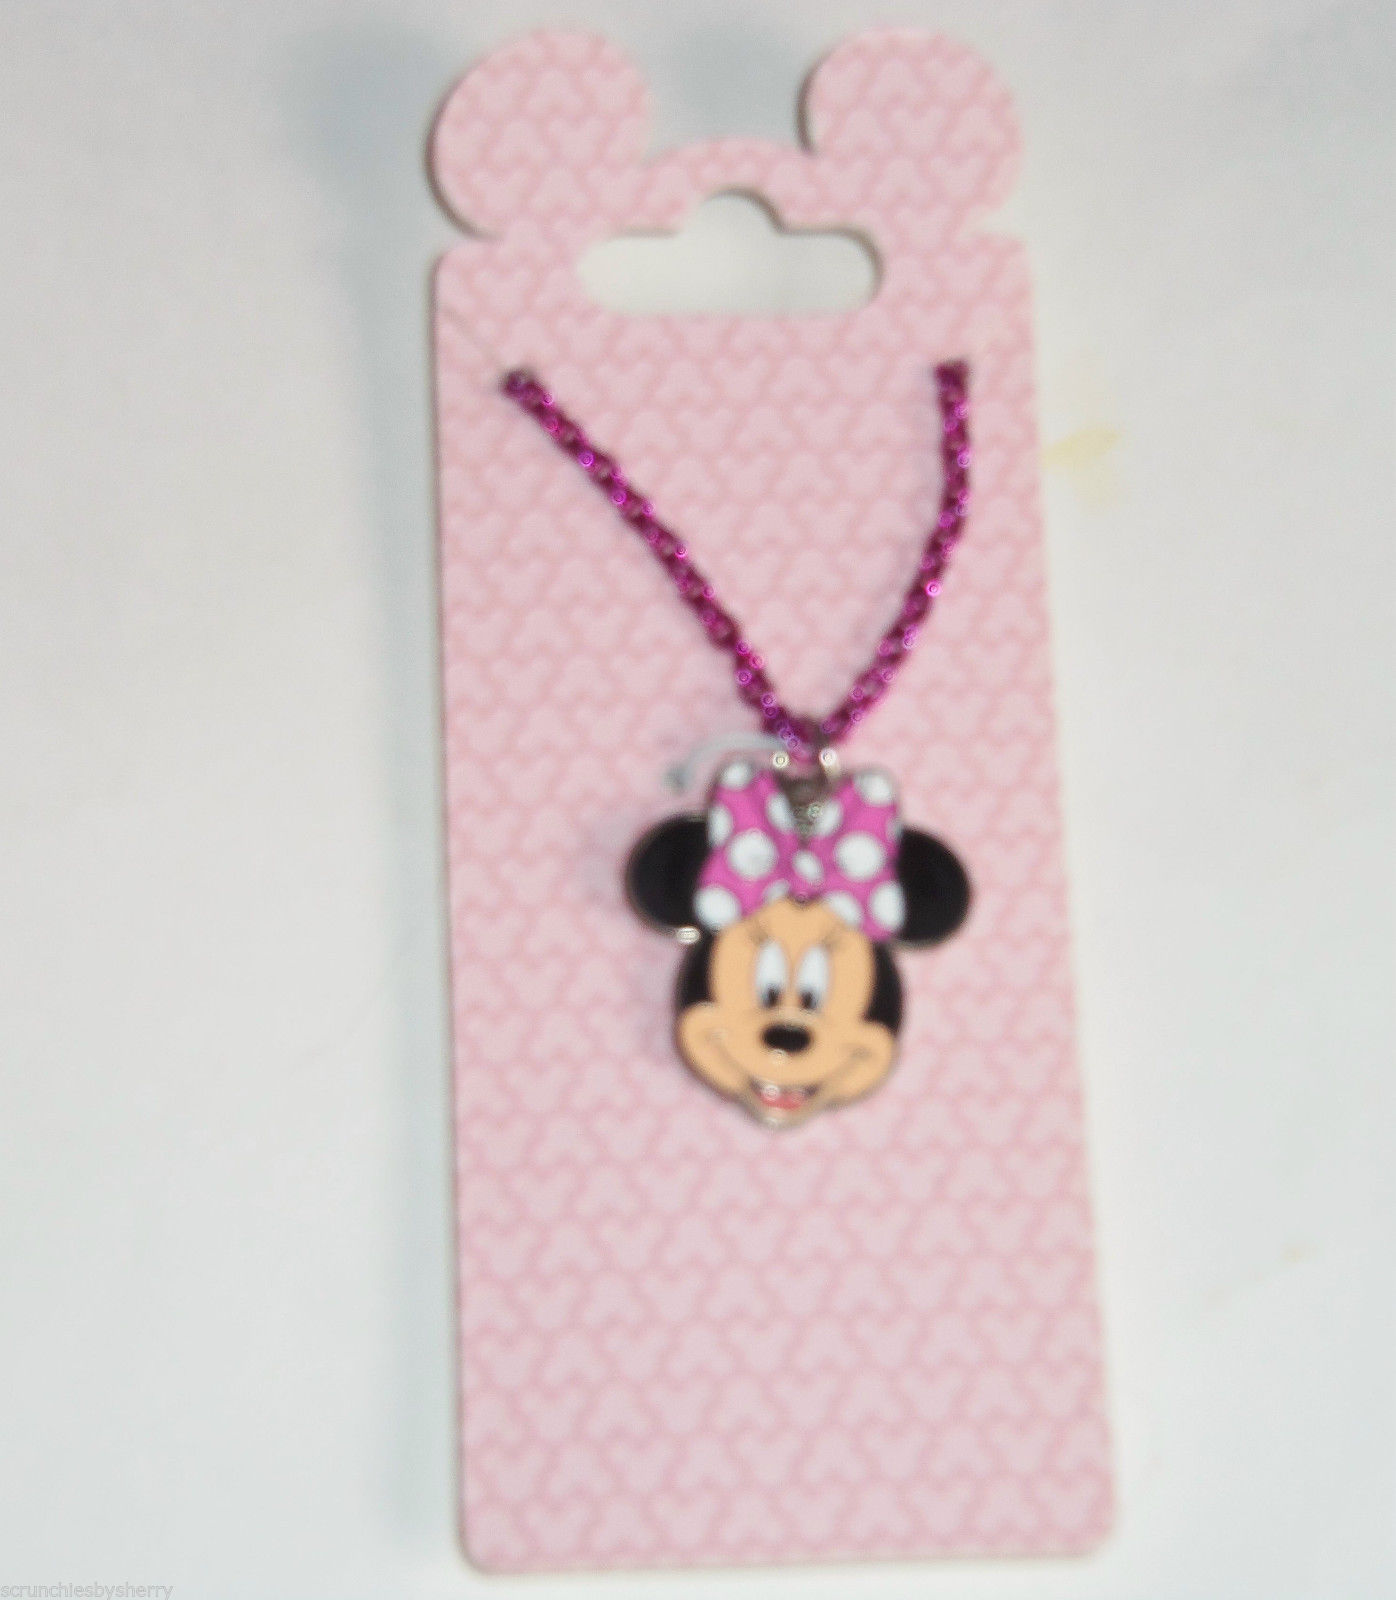 Minnie Mouse Fashion Jewellery Necklace & Earring Set | Taylors Merchandise